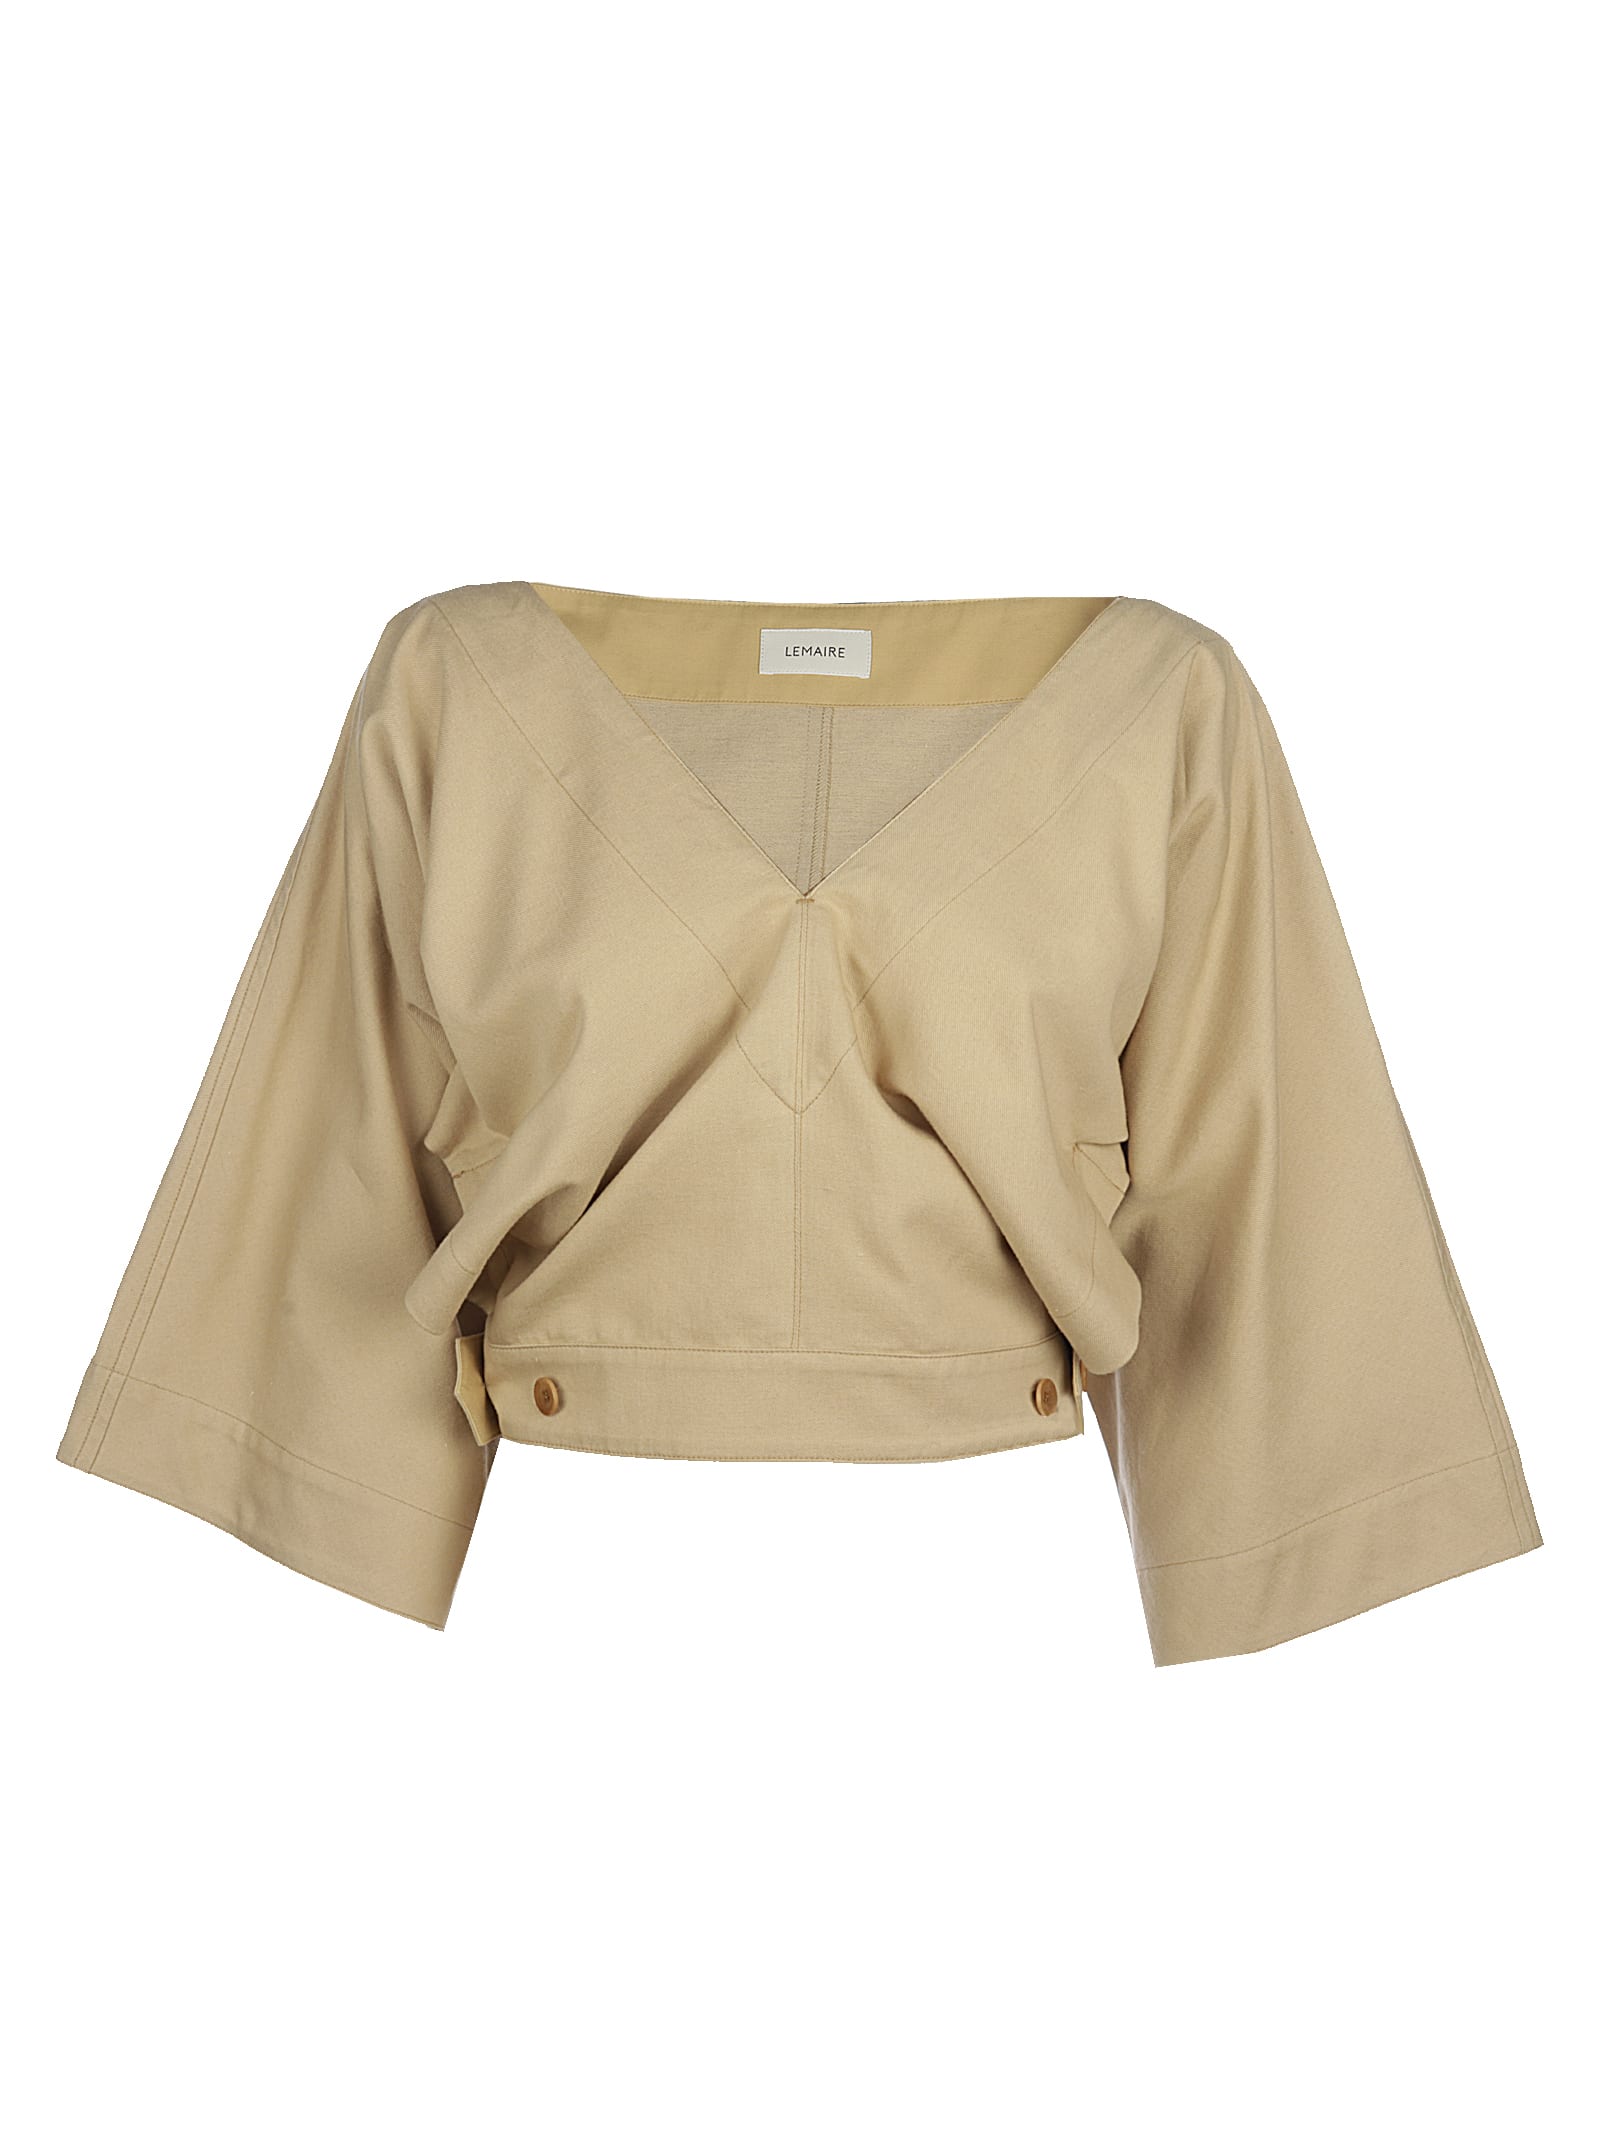 Lemaire Vareuse Top